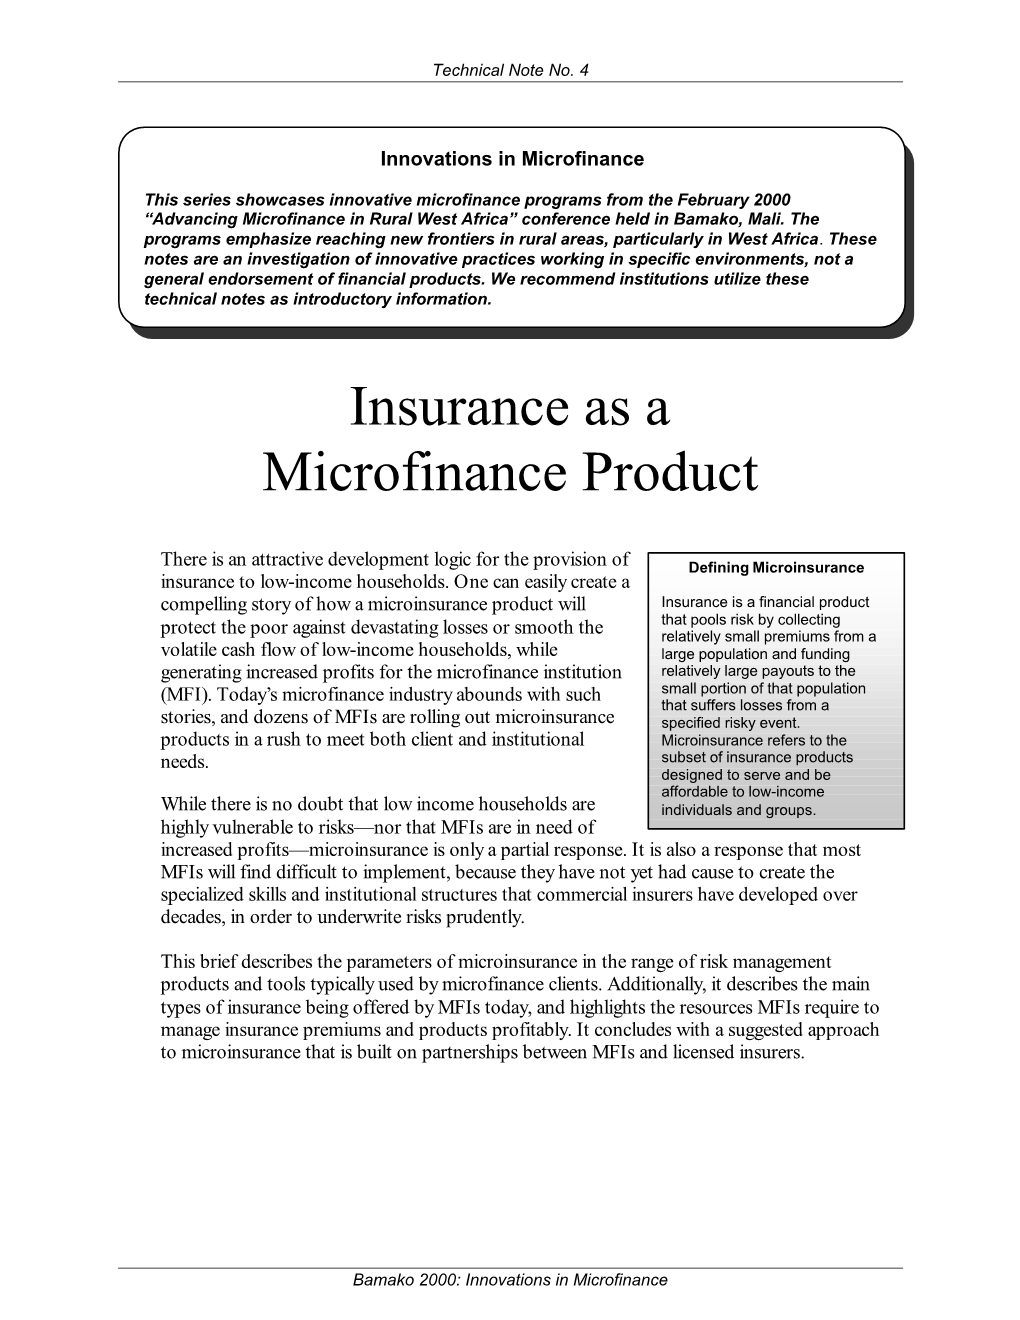 Insurance As a Microfinance Product